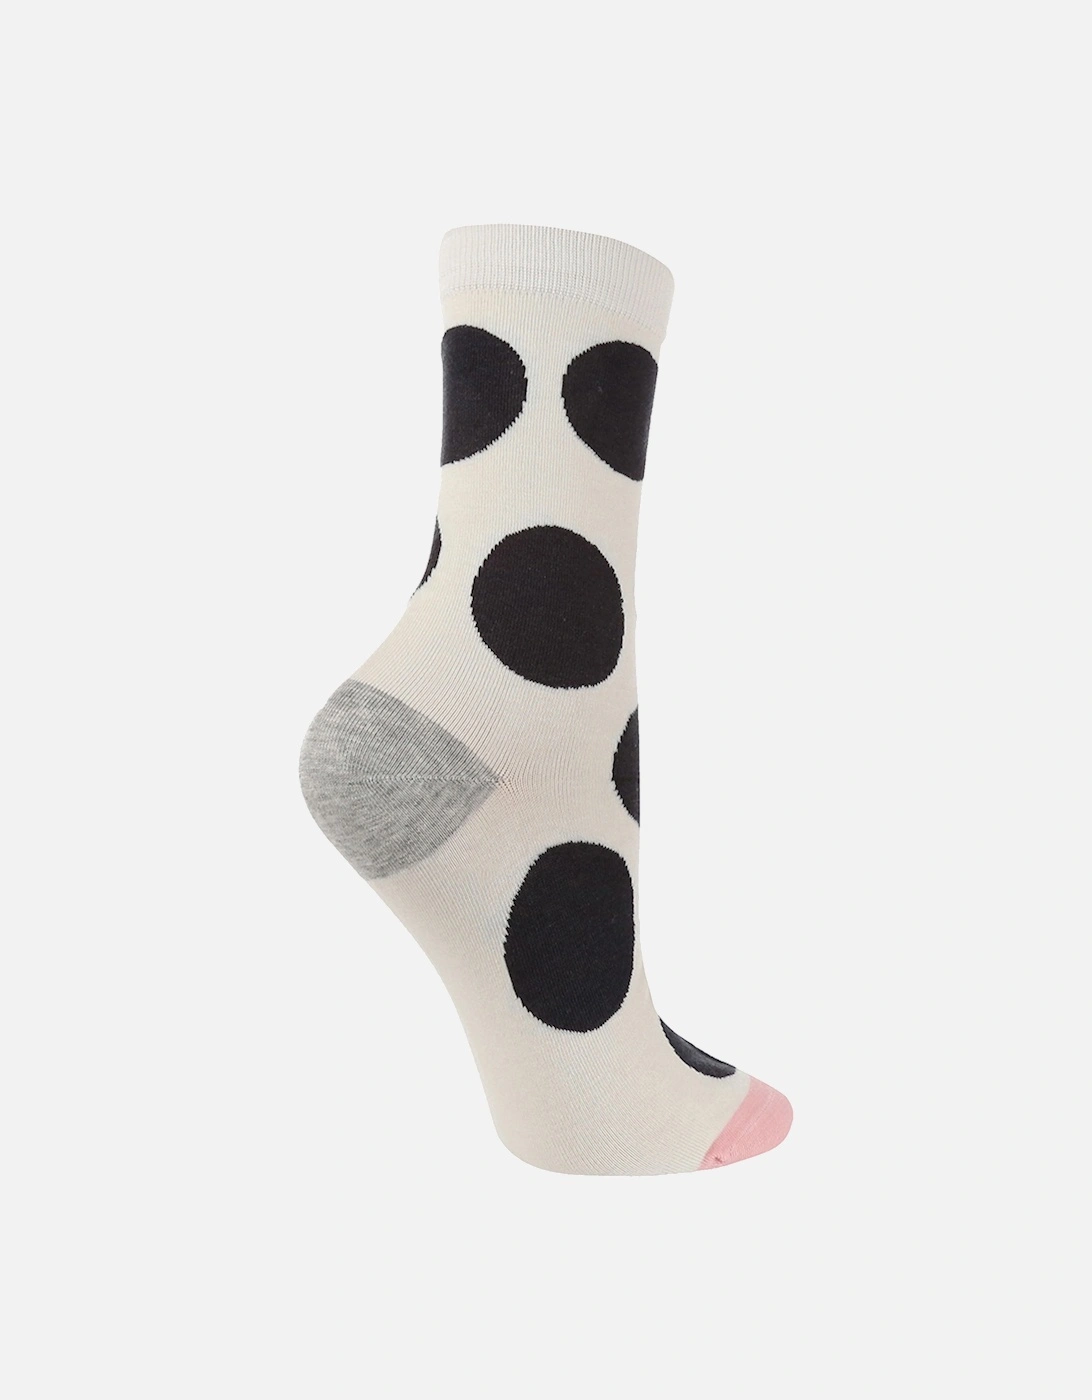 1 PAIR HIGH-END CREAM SOCK WITH LARGE BLACK SPOTS, 2 of 1